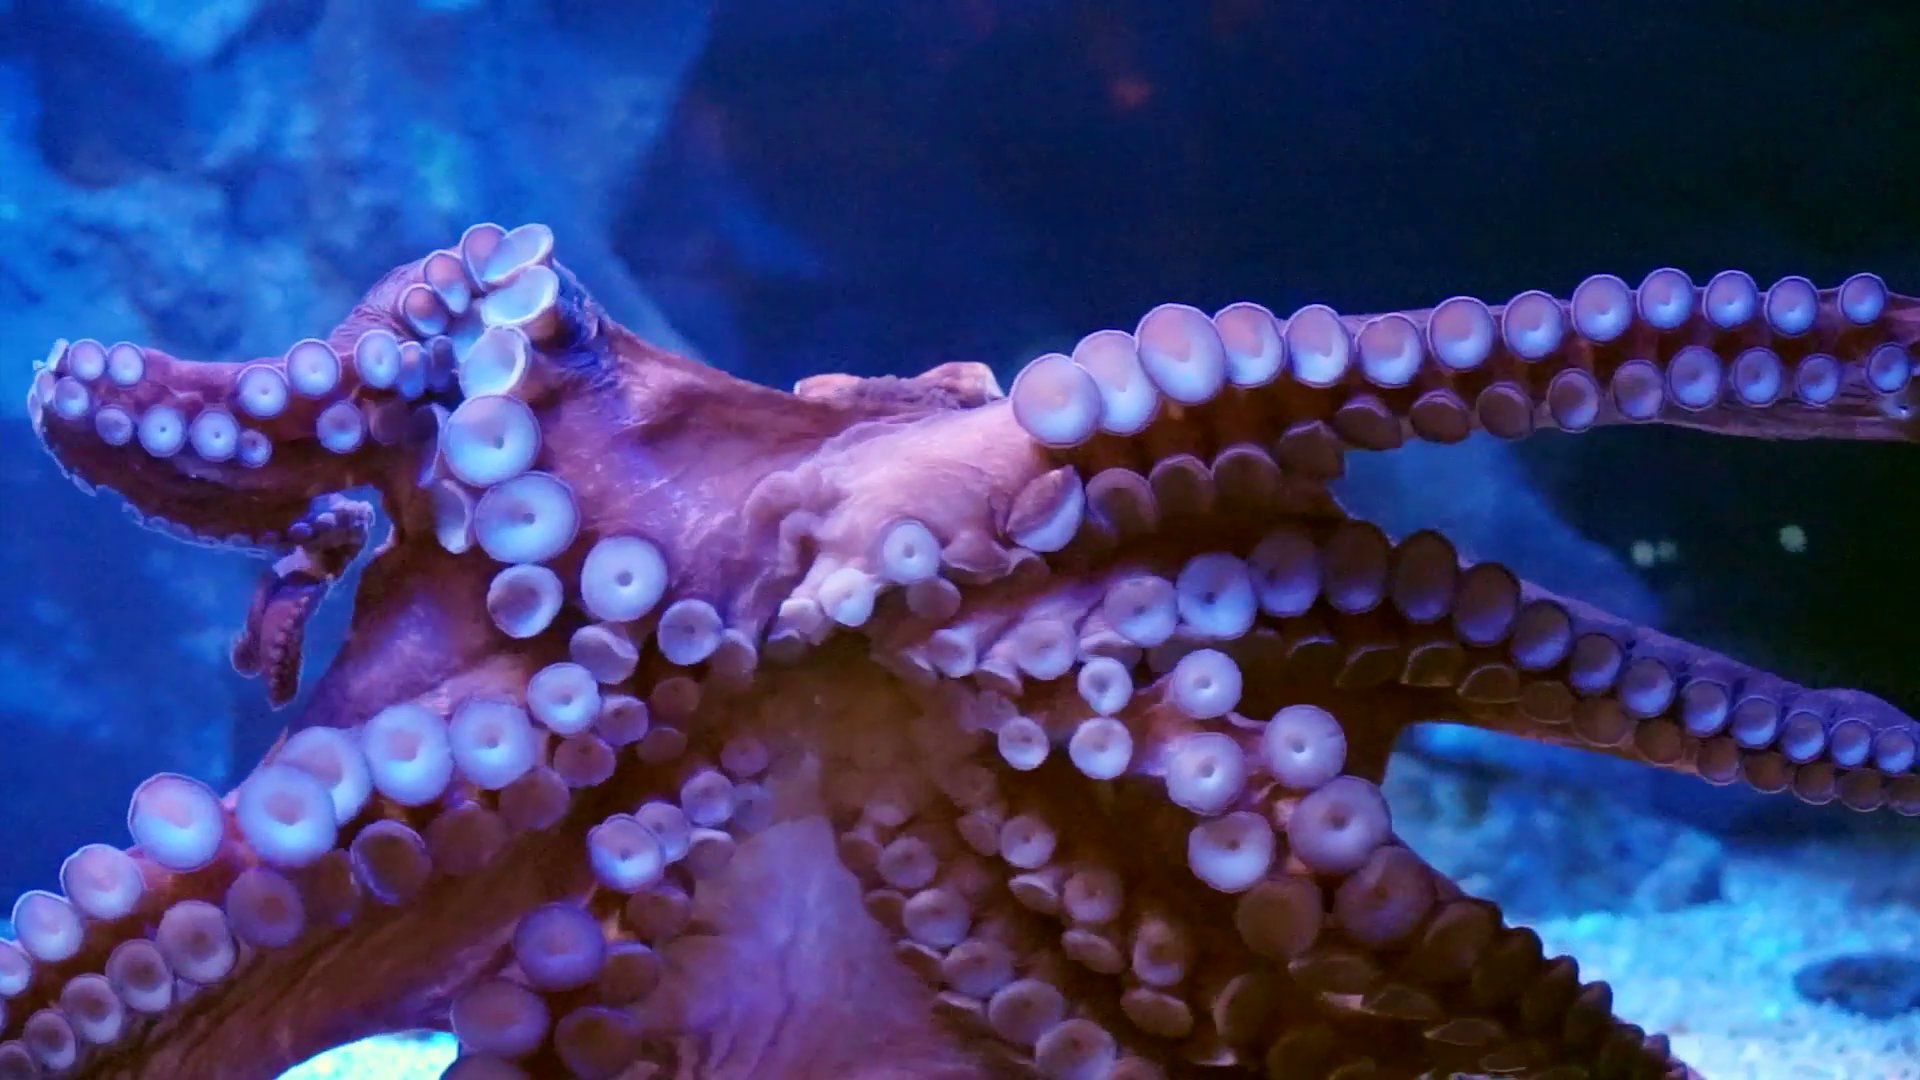 Giant octopus spreads tentacles and attach on glass at the aquarium ...